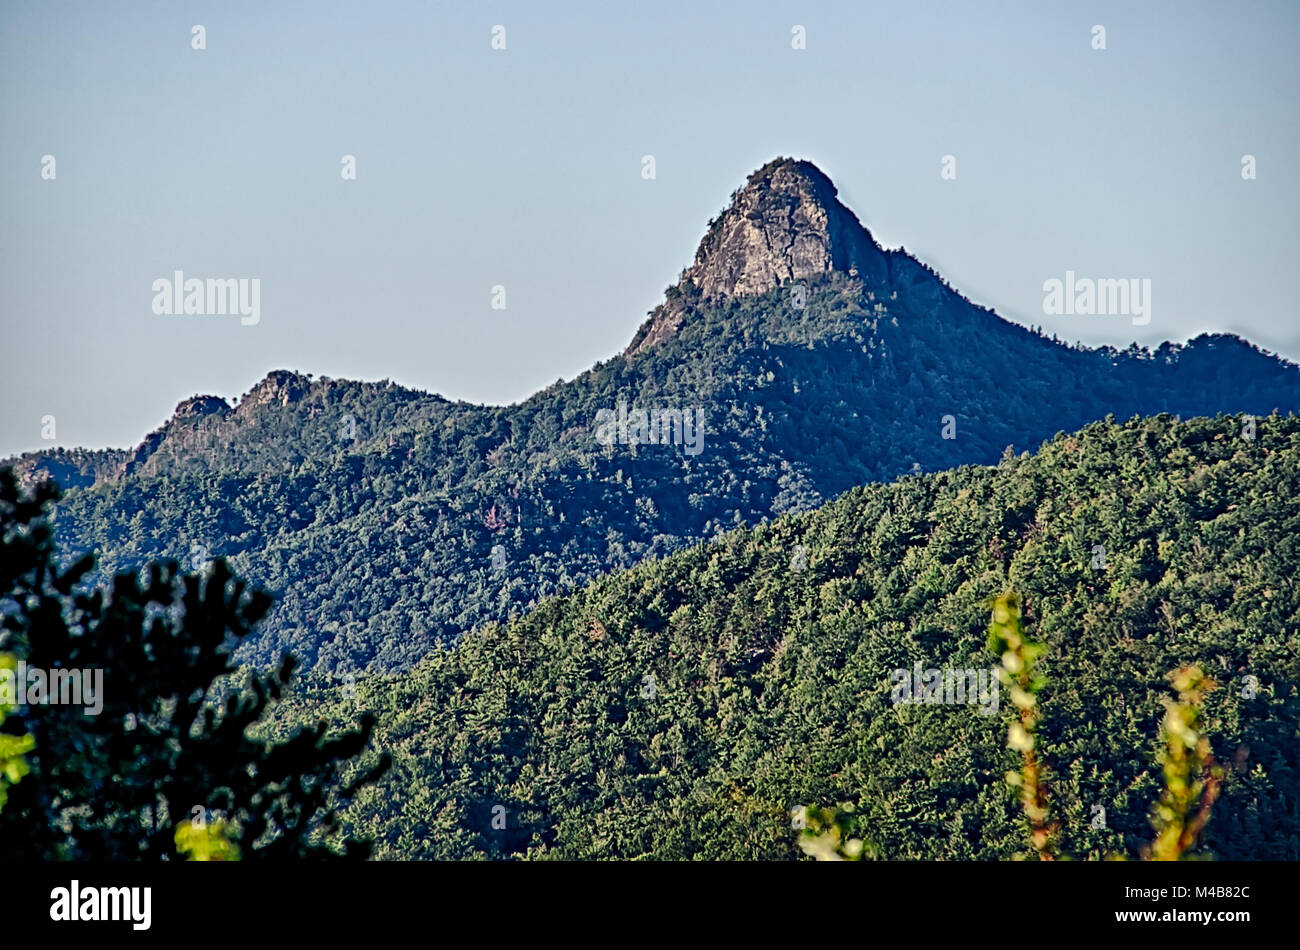 Hawksbill Mountain at Linville gorge with Table Rock Mountain landscapes Stock Photo